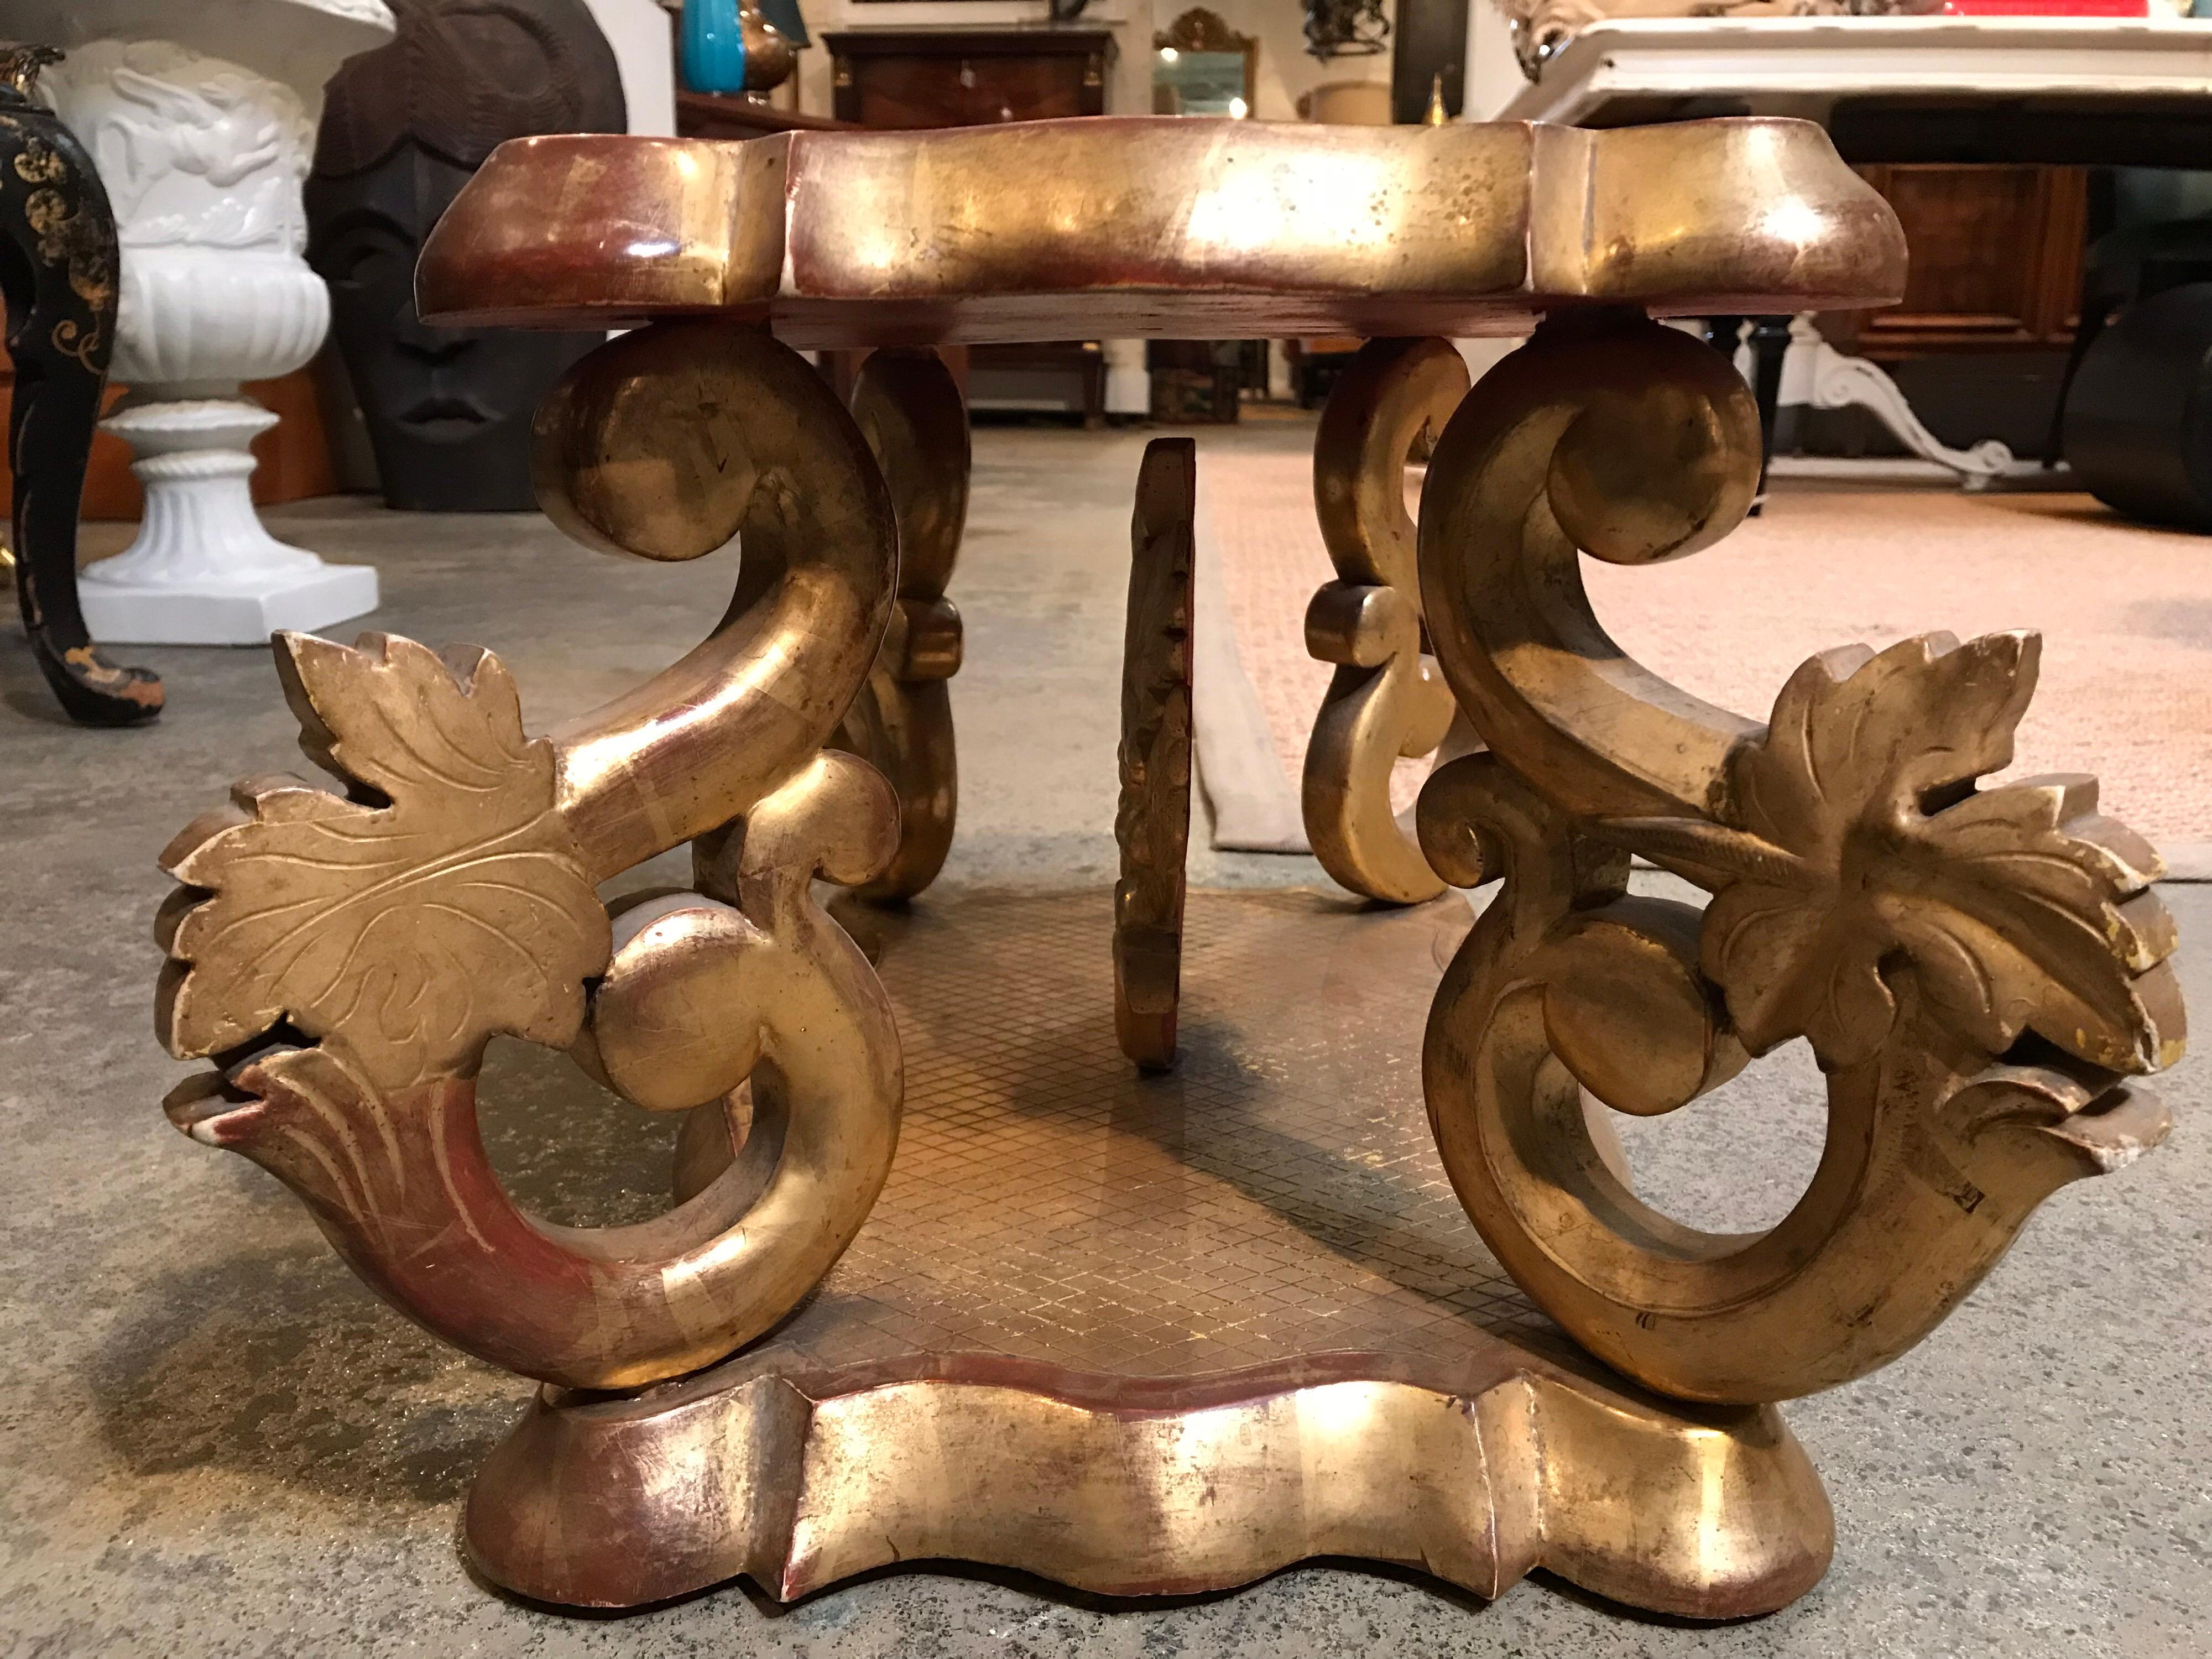 This short Italian stand is gilded in gold and was made sometime in the early 19th century. The 4 supports were carved in a serpentine form with a leaf on each one. It has something of a relic on the inside, also gilded. The top layer does come off